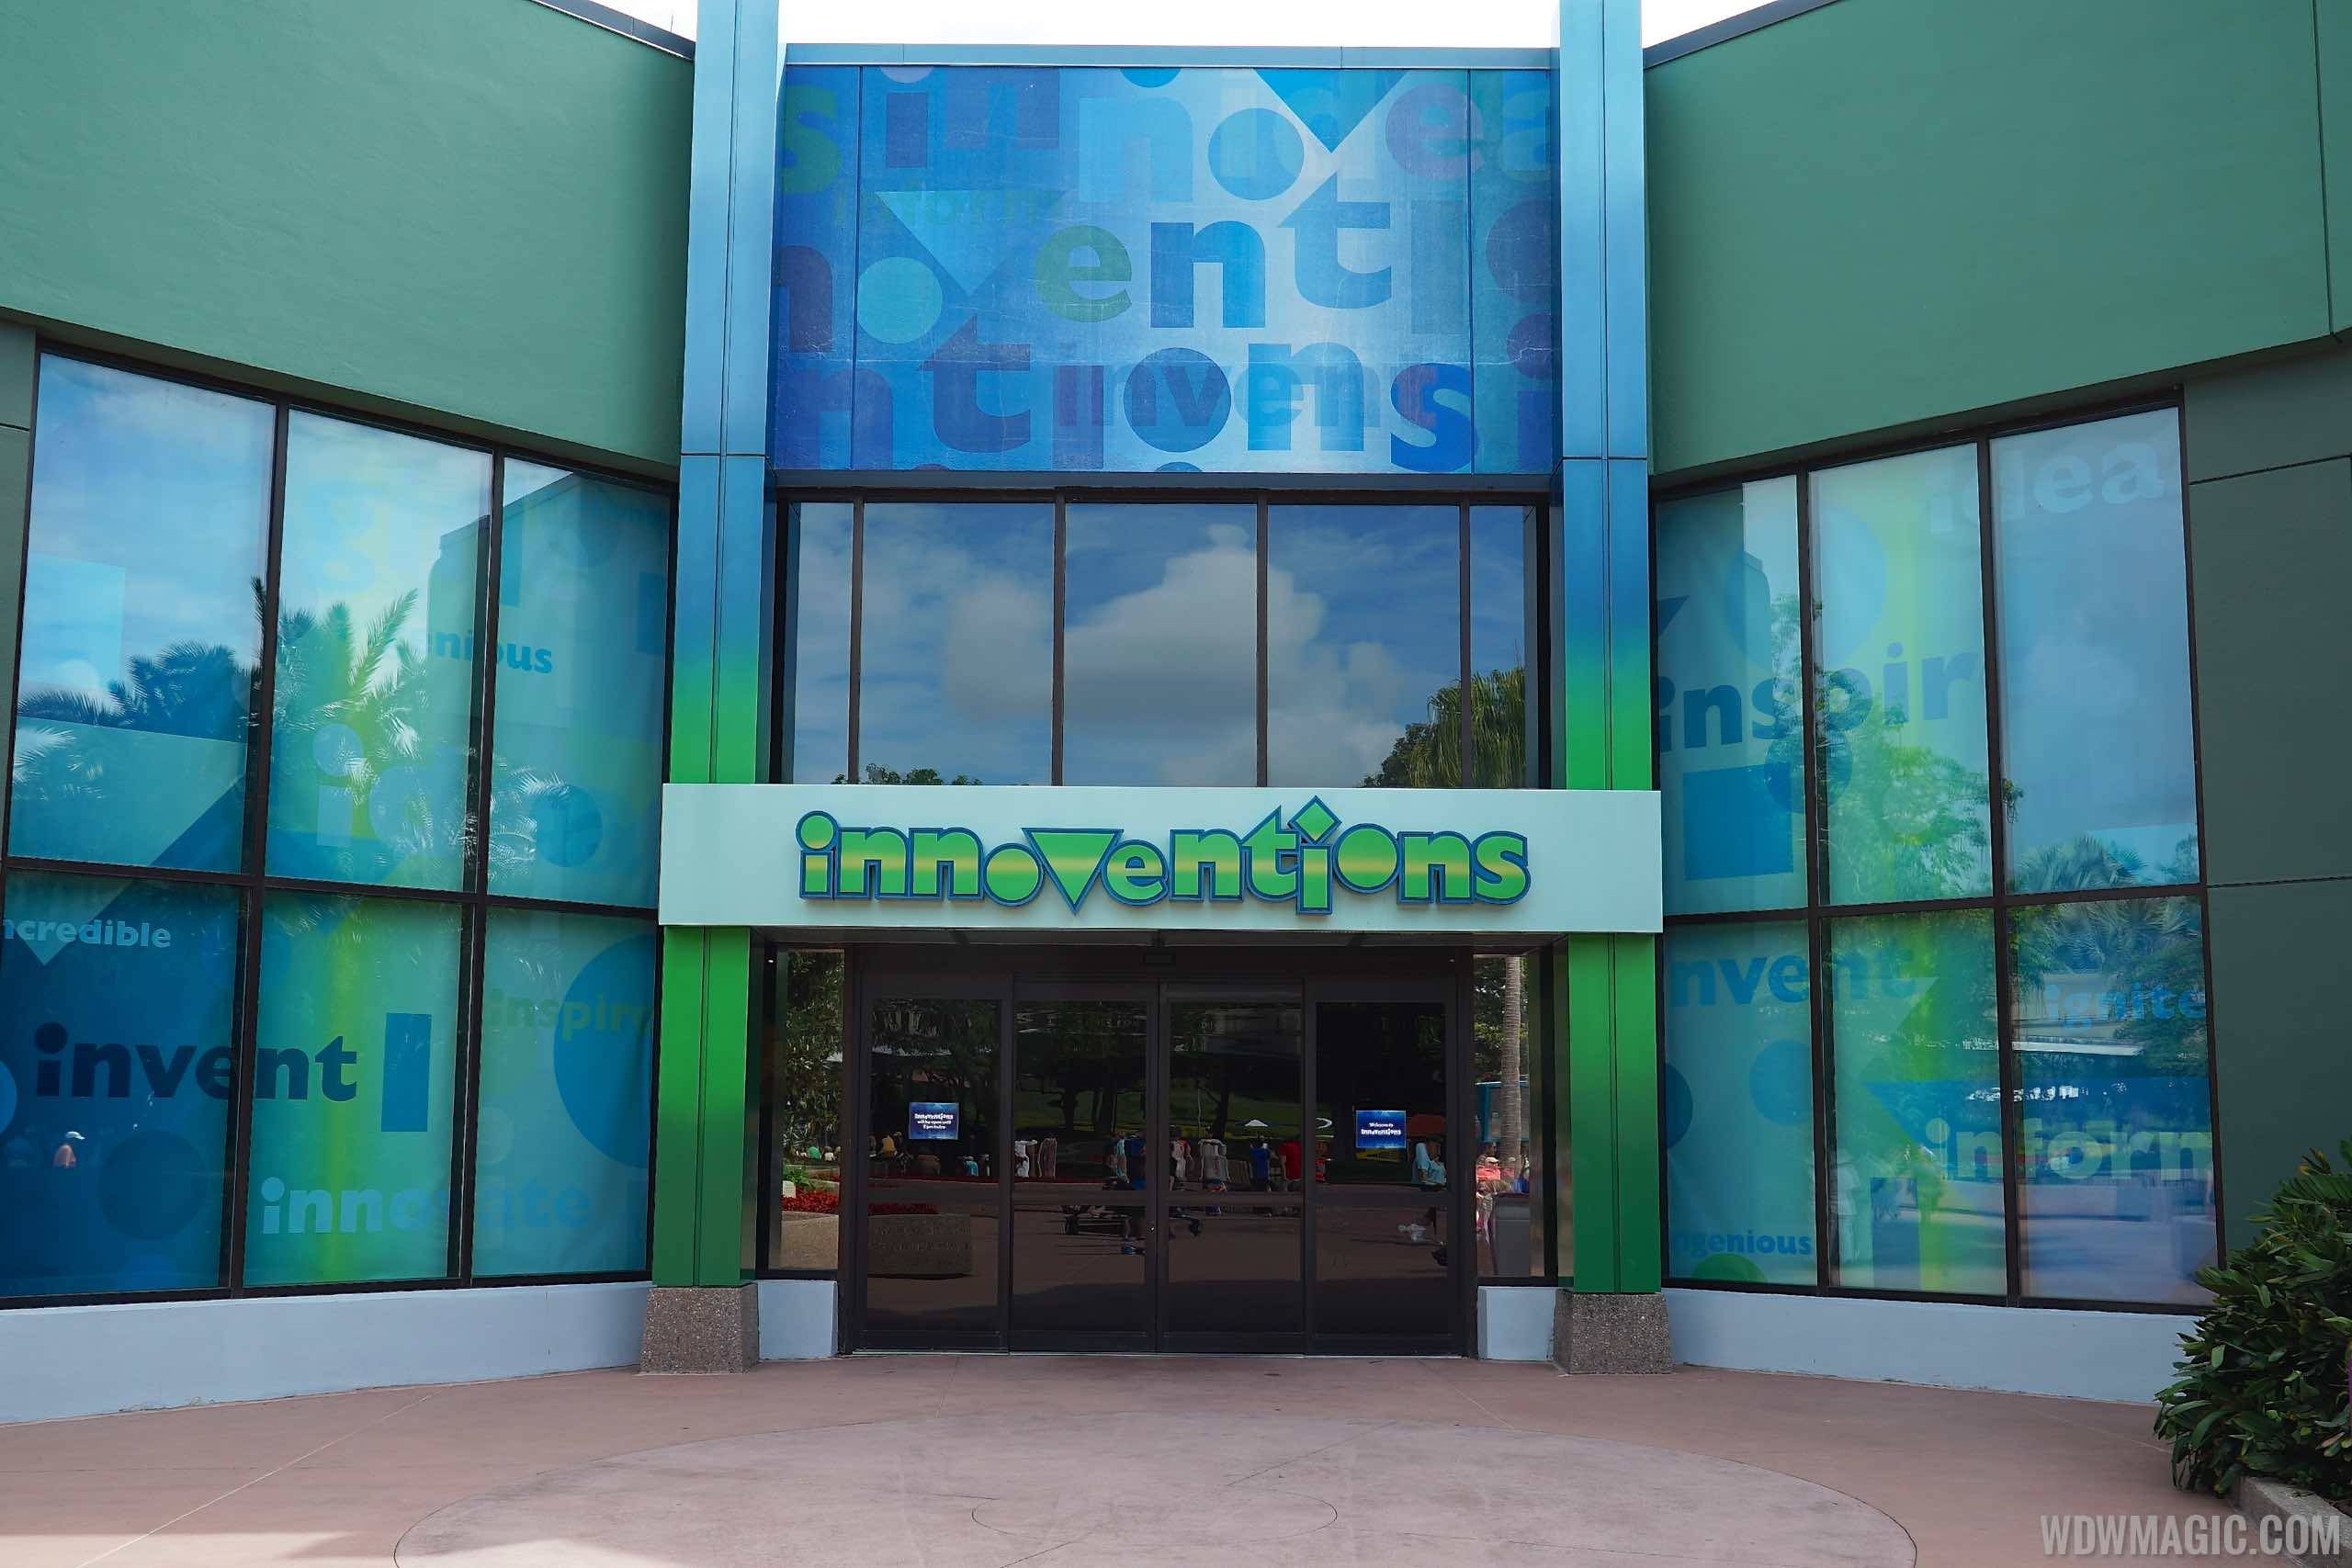 The Great Piggy Bank Adventure Exhibit to open this Spring at Innoventions